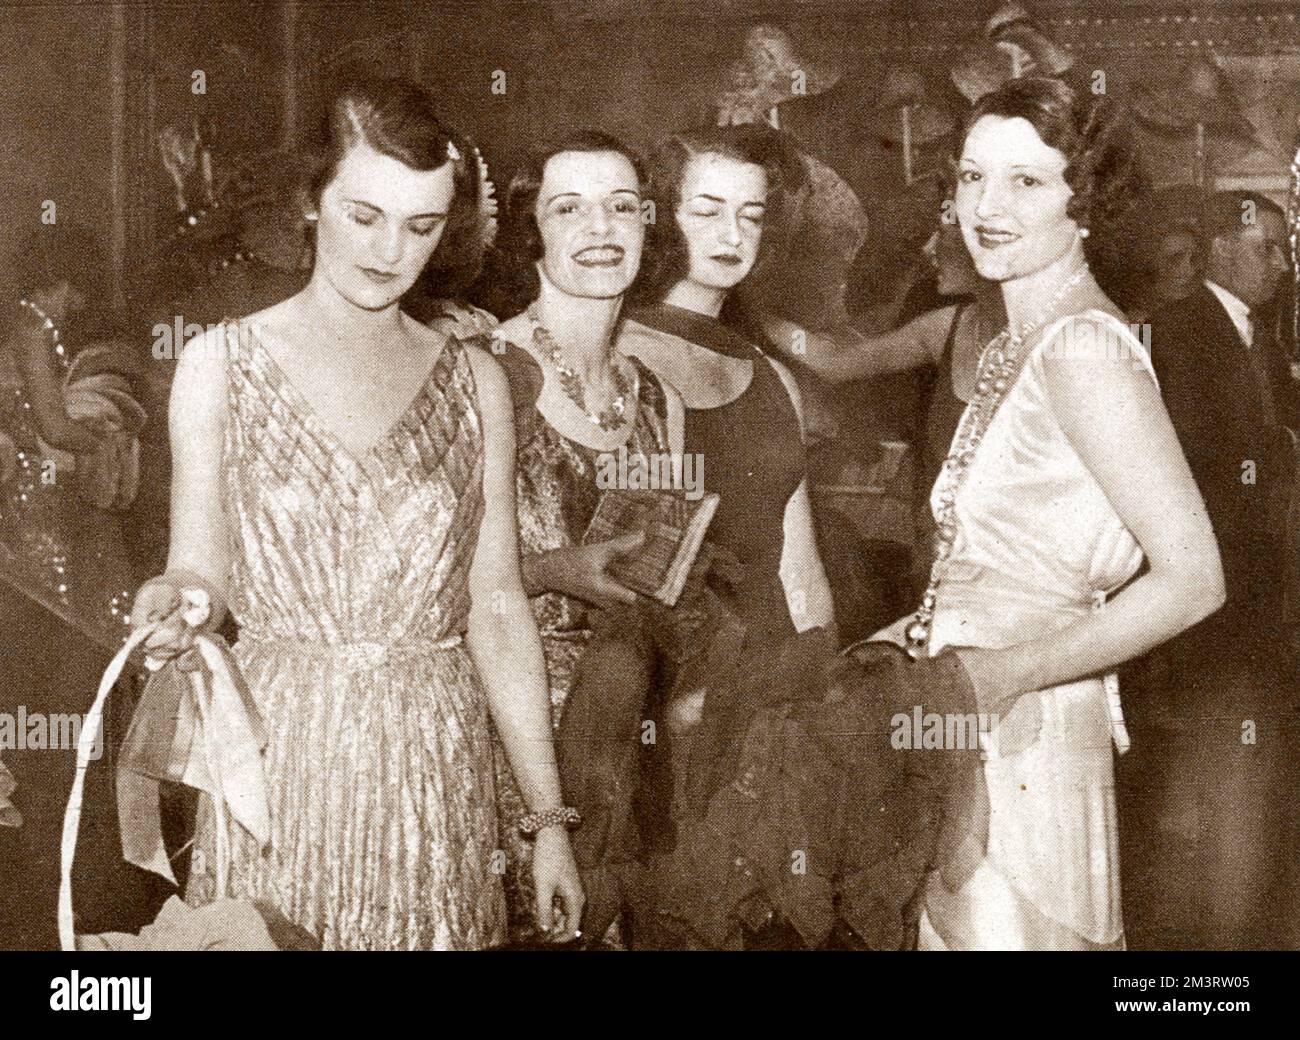 A quartette of young society women at the Westminster Hospital Ball at the Dorchester Hotel in June 1931.  From left, Miss Margaret Whigham, Miss Cathleen Nesbitt, Lady Patricia Moore and Lady Lindsay Hogg (Frances Doble).     Date: 1931 Stock Photo